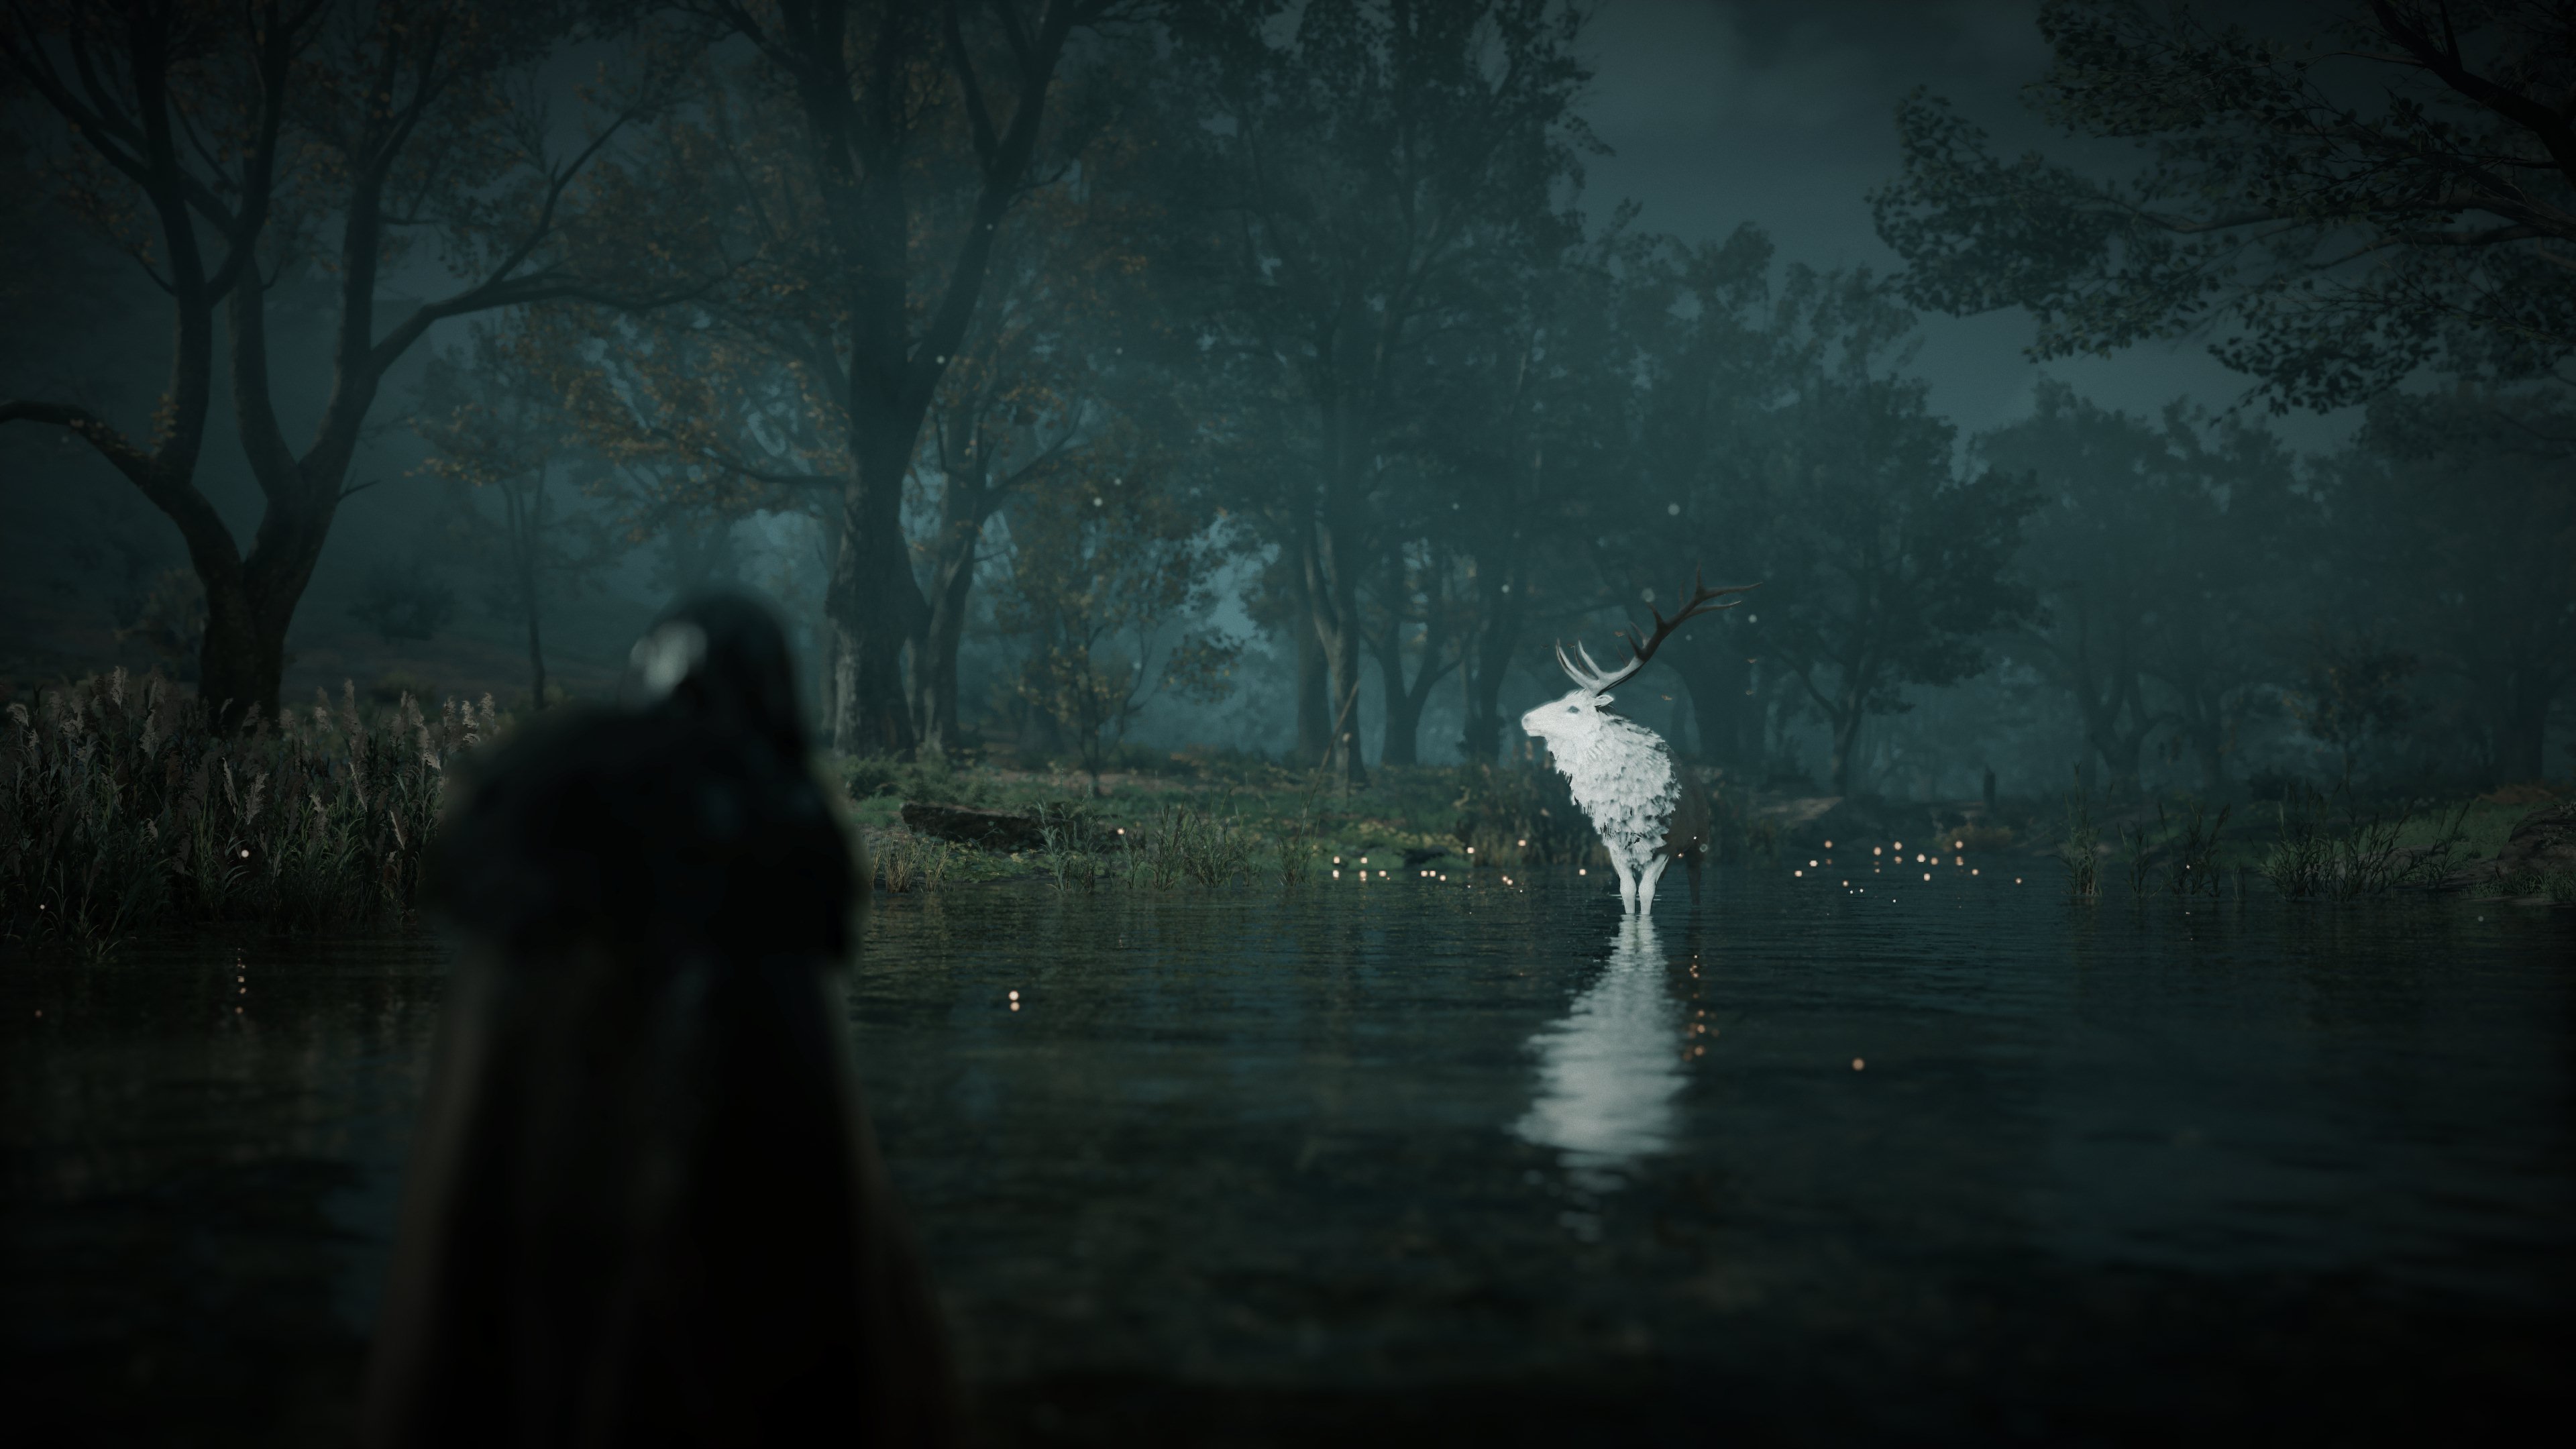 General 3840x2160 Assassin's Creed: Valhalla Ubisoft elk digital art video games video game characters CGI video game art screen shot night trees forest reflection animals